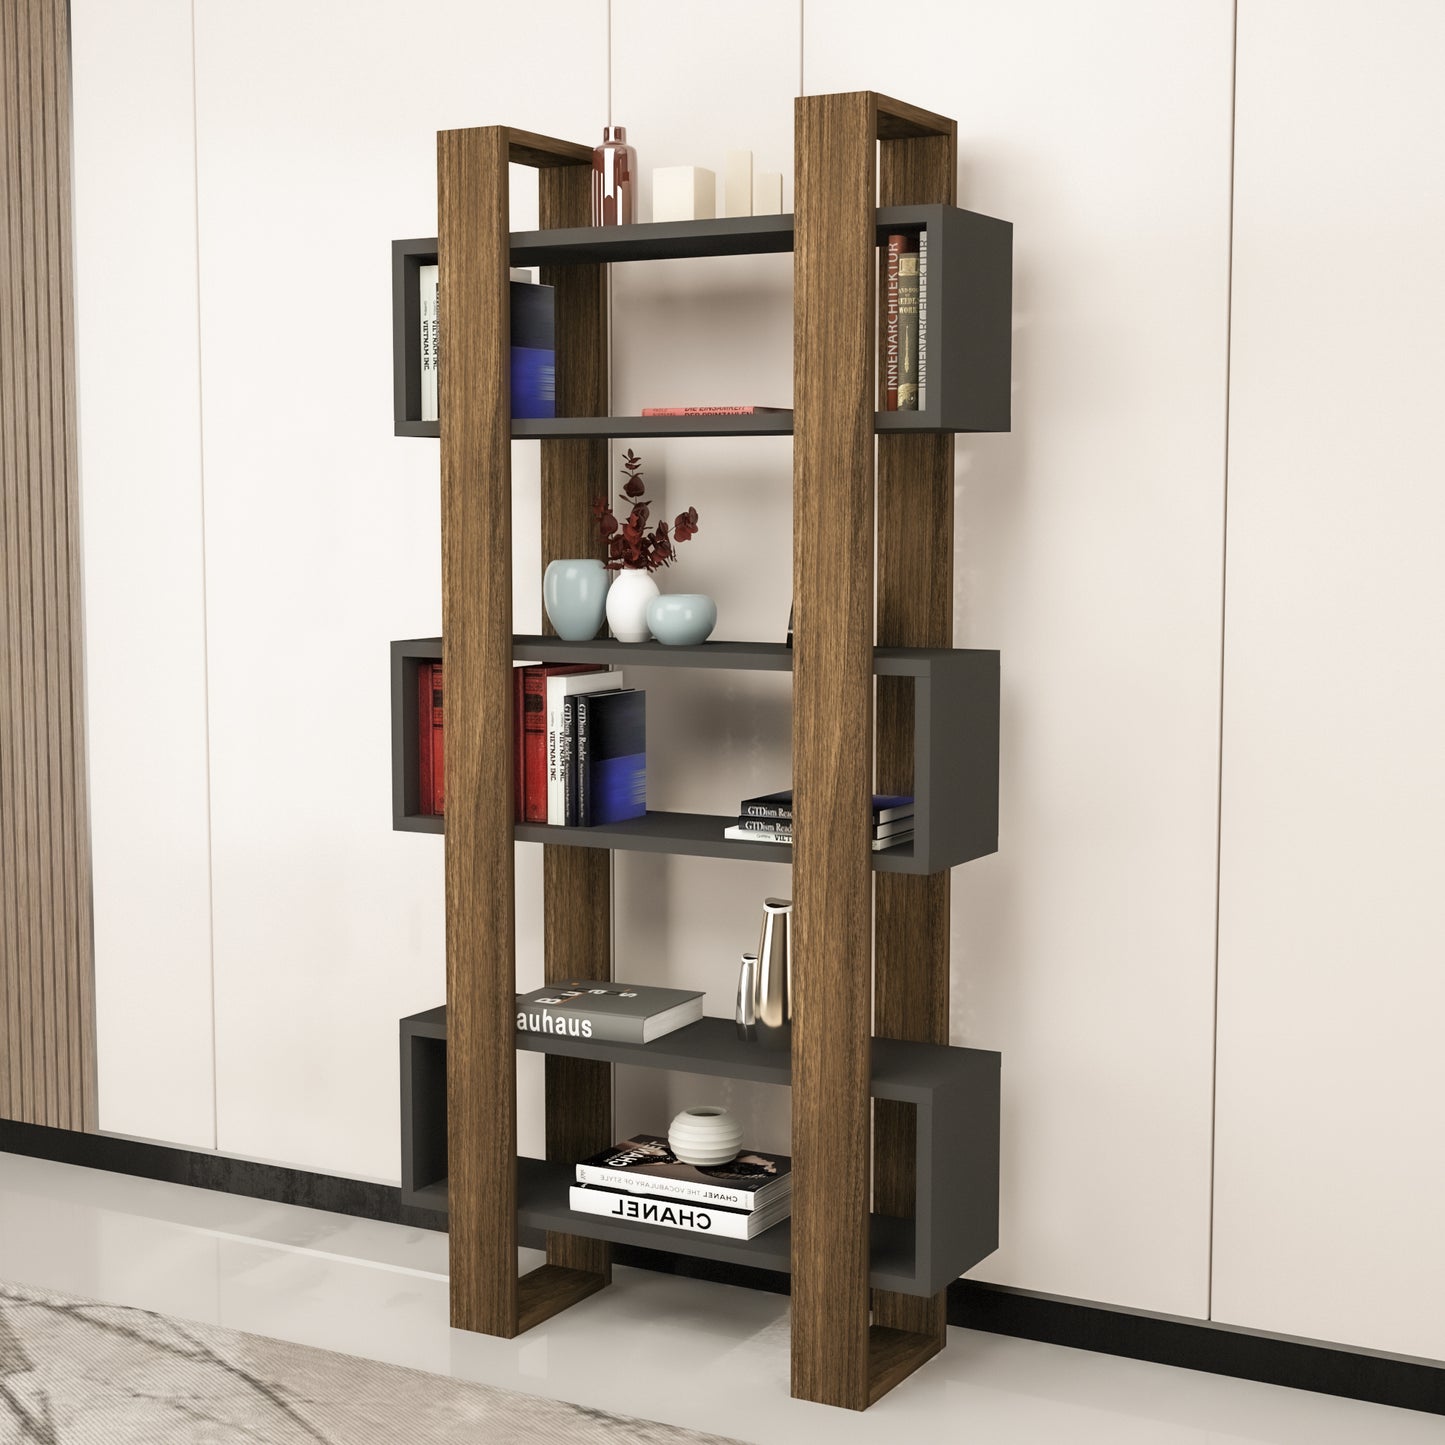 Ocean Bookcase with Geometric Shelves